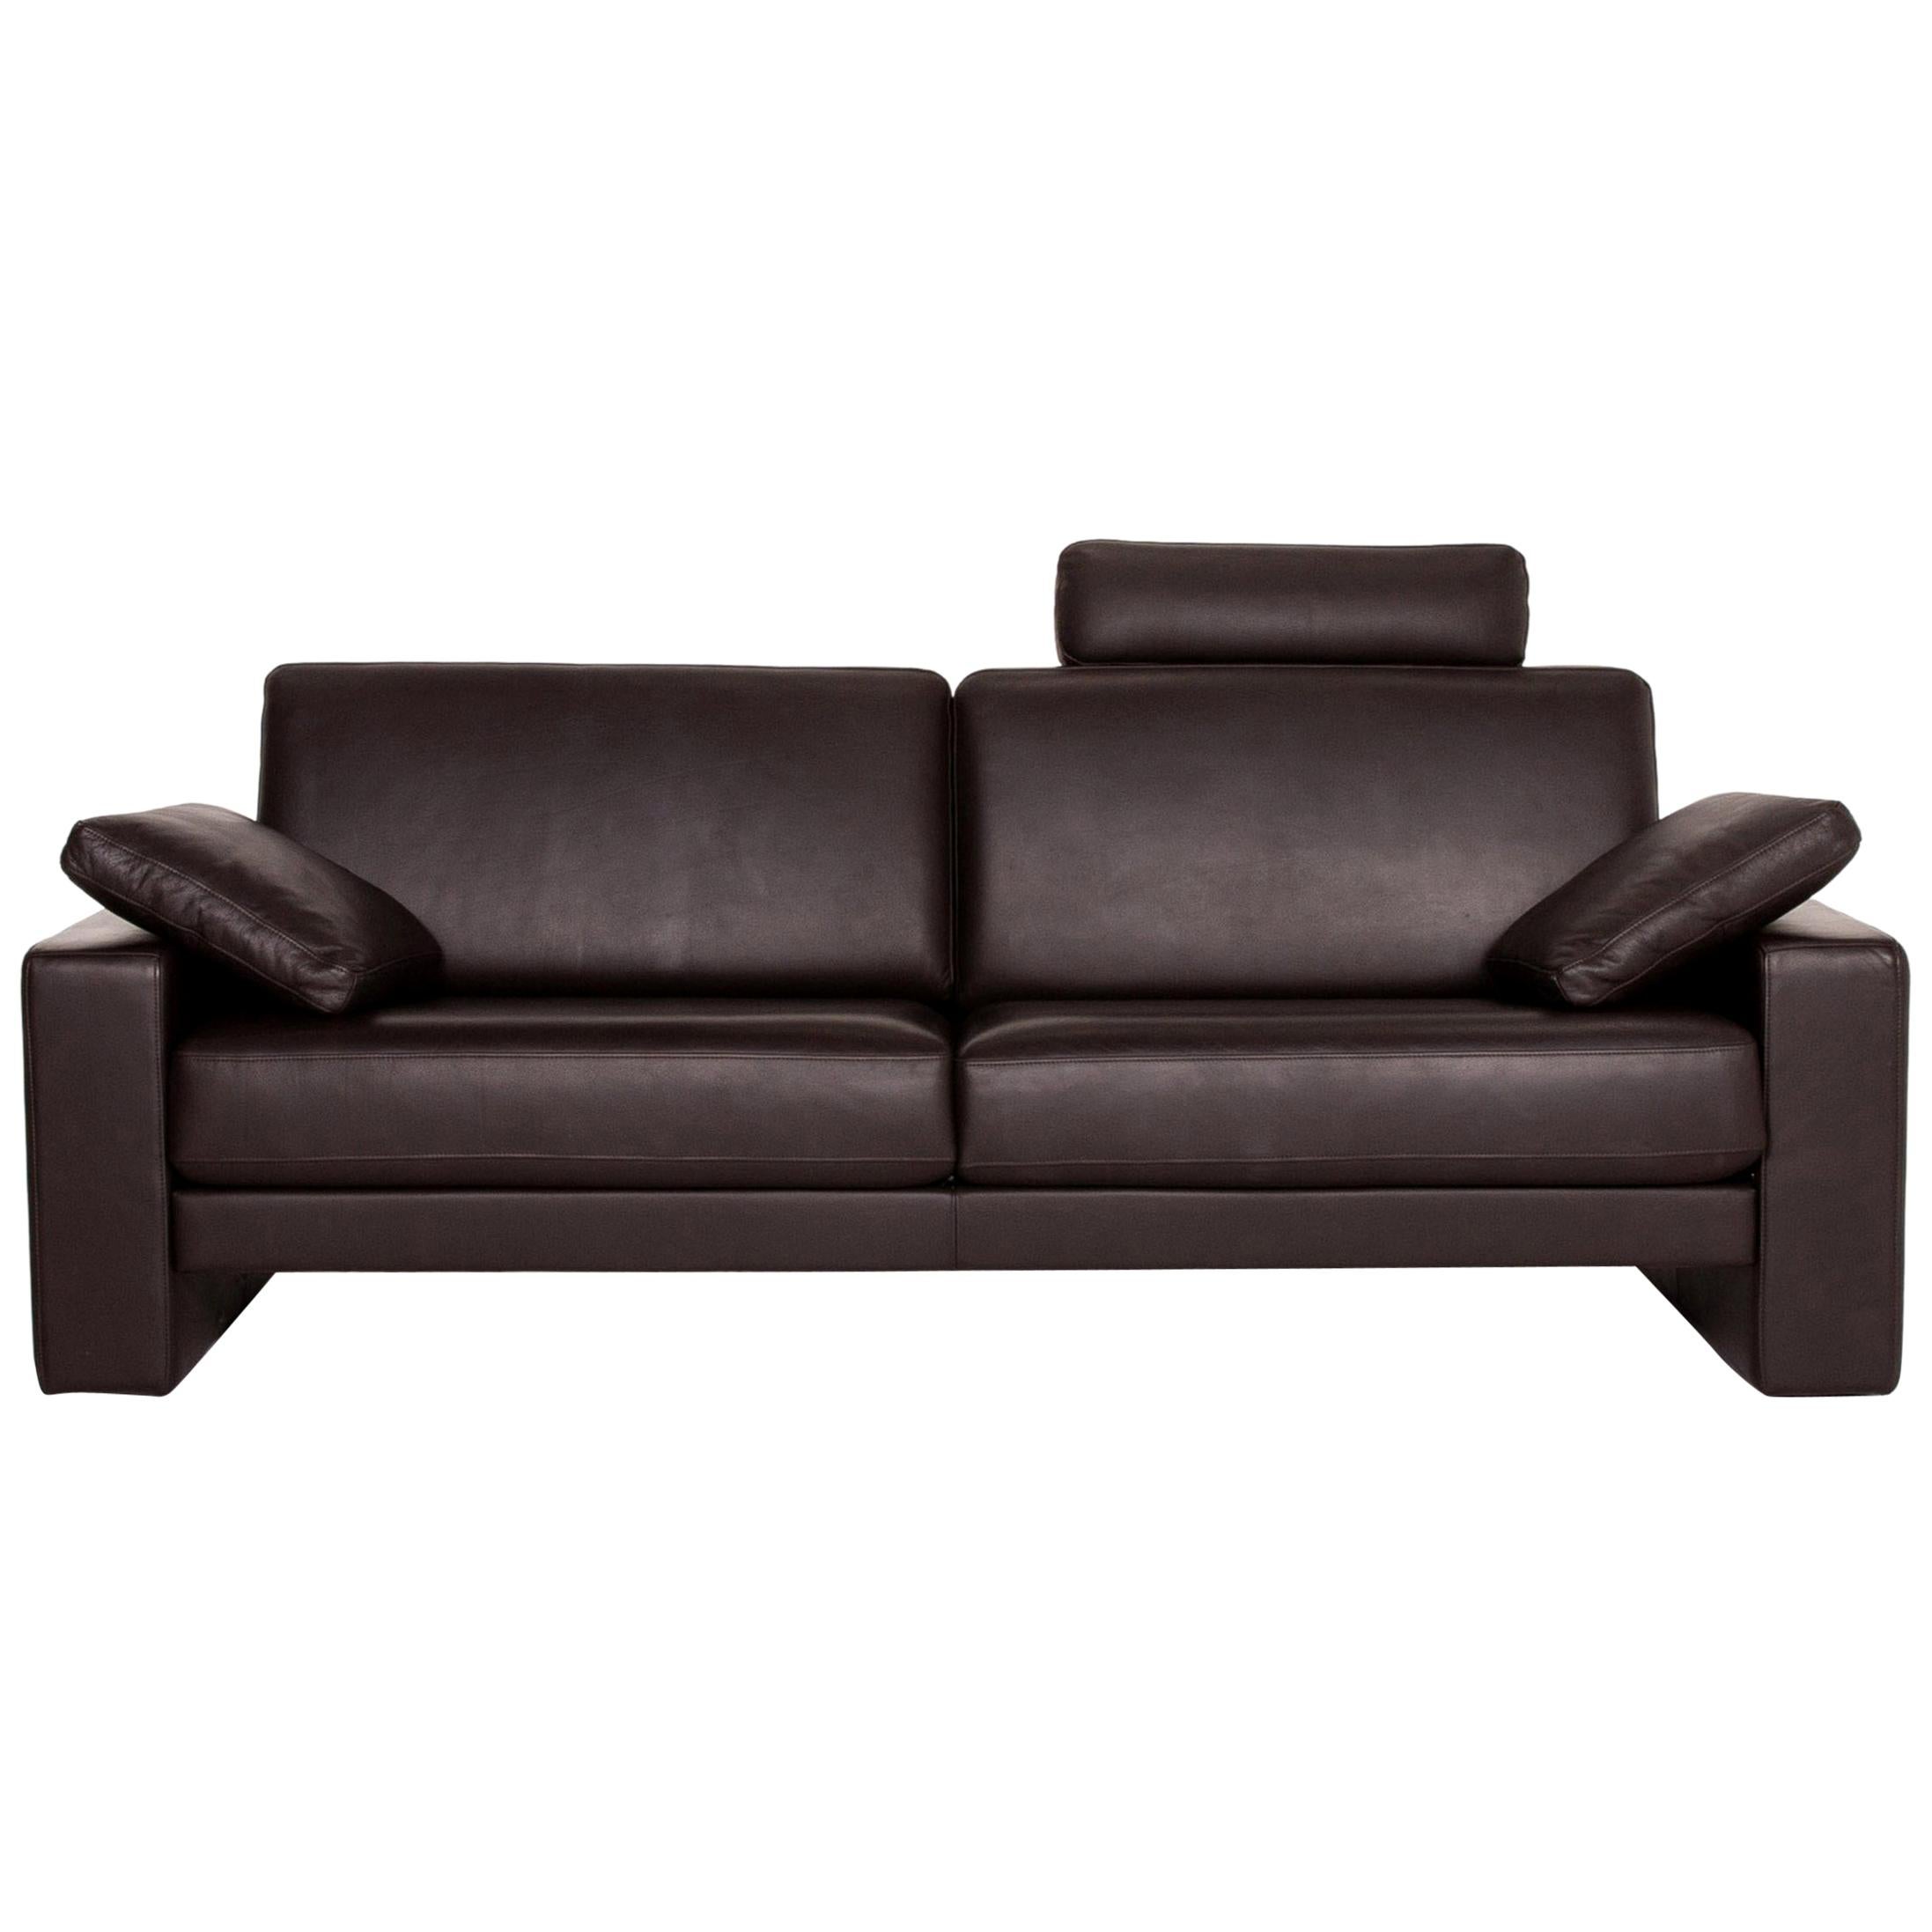 Rolf Benz Ego Leather Sofa Dark Brown Three-Seat Couch For Sale